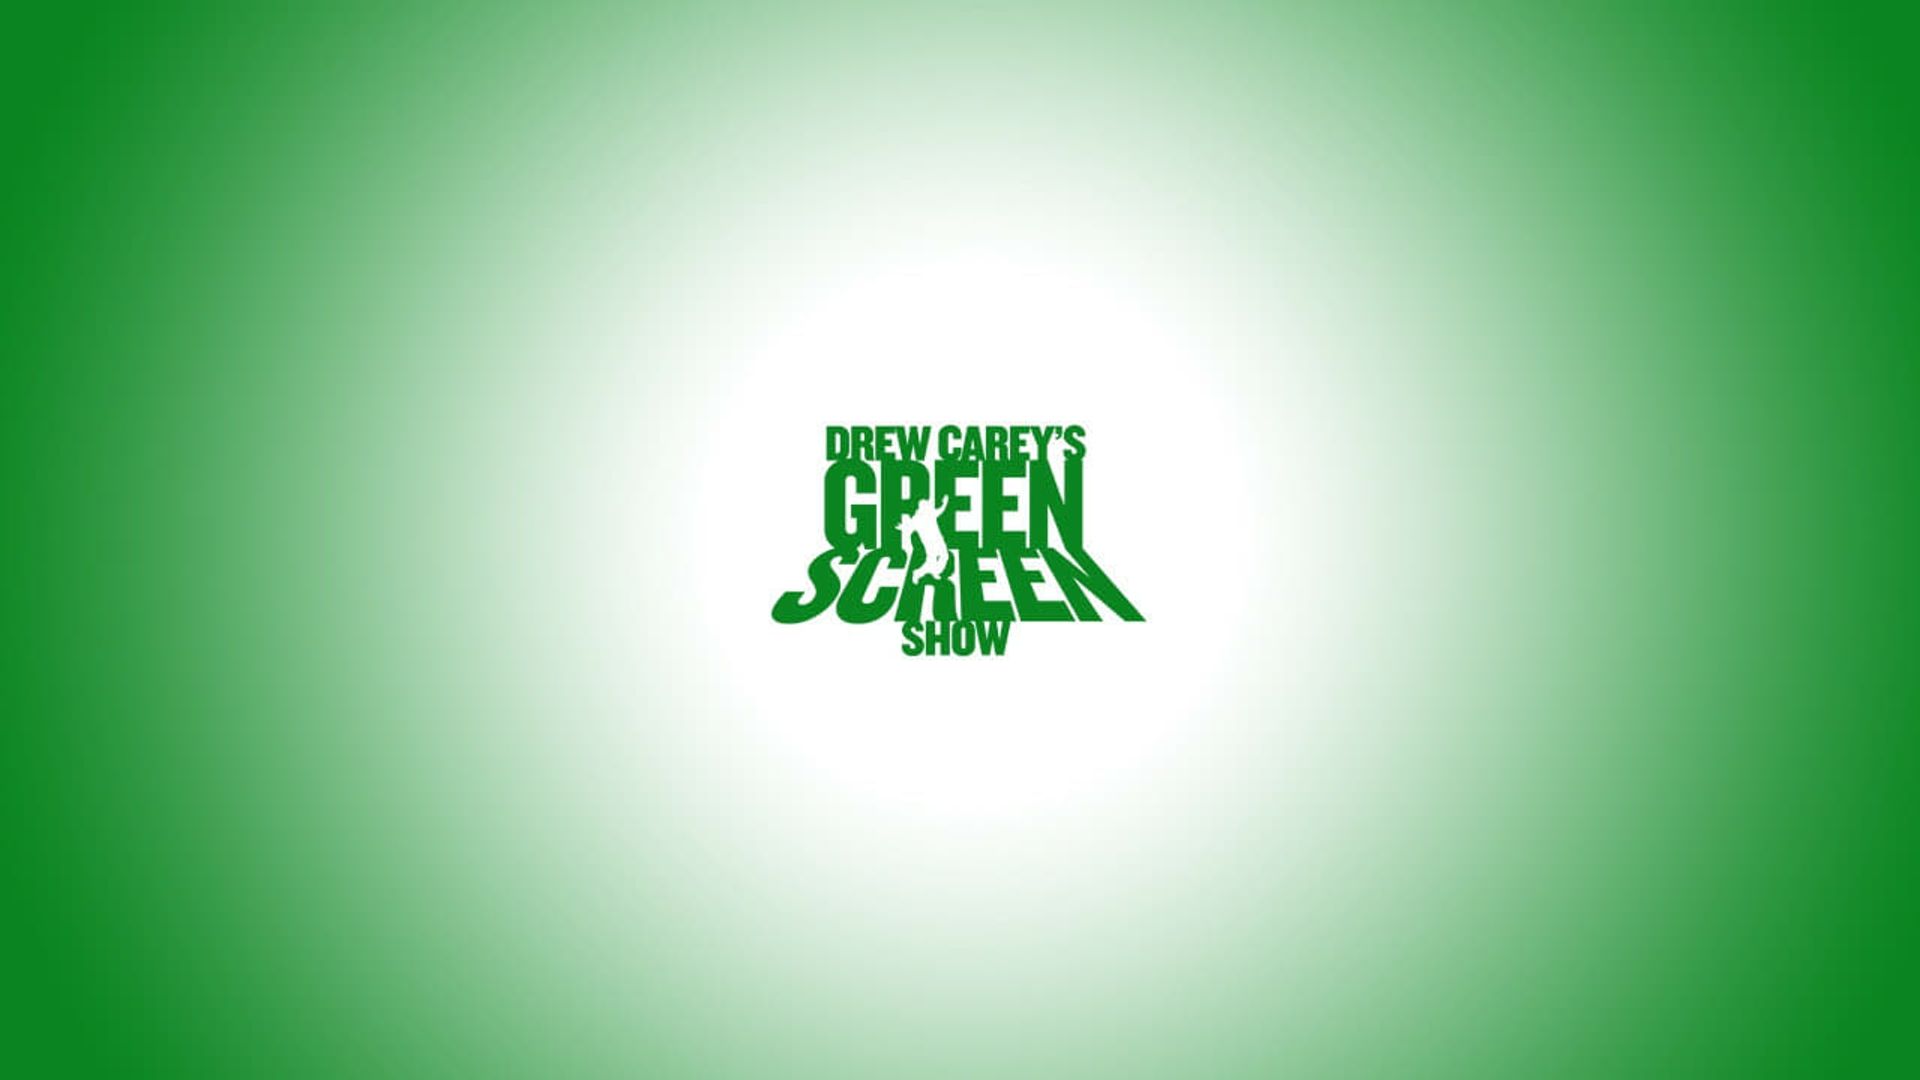 Green Screen Show background